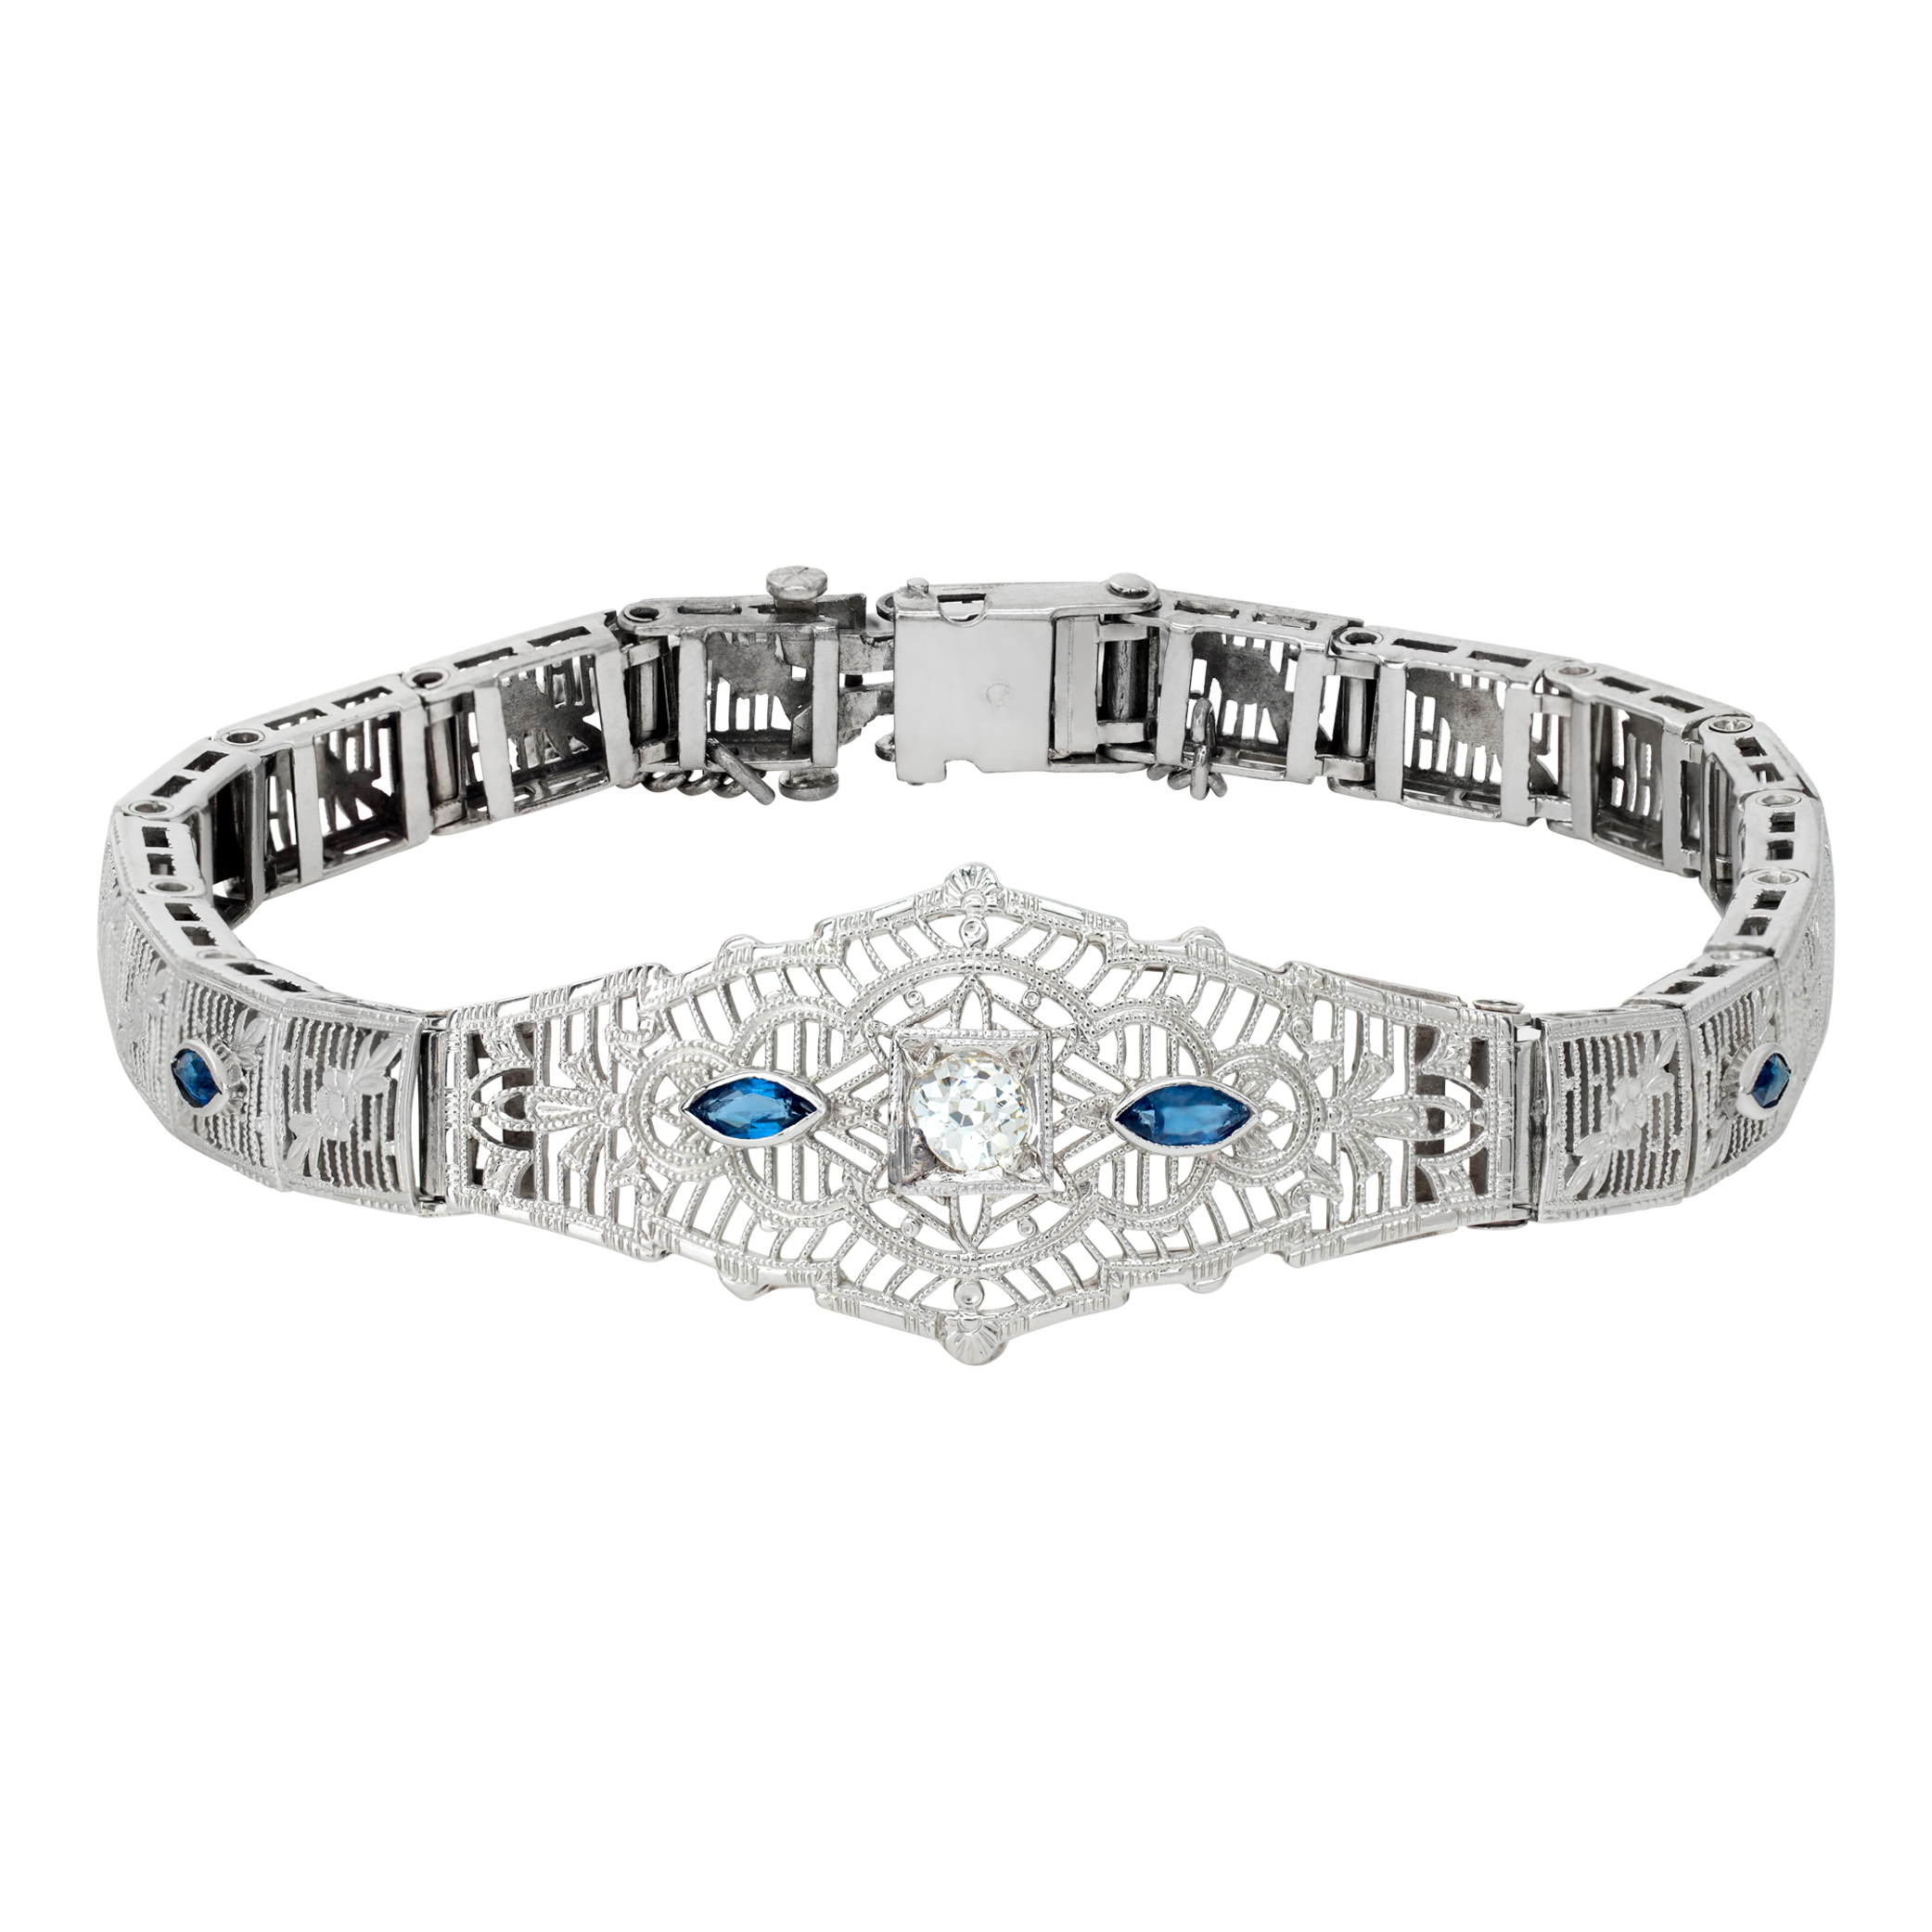 Edwardian filigree bracelet in 14k white gold with center rose cut diamond (0.10 carats) and 4 marquise blue sapphires